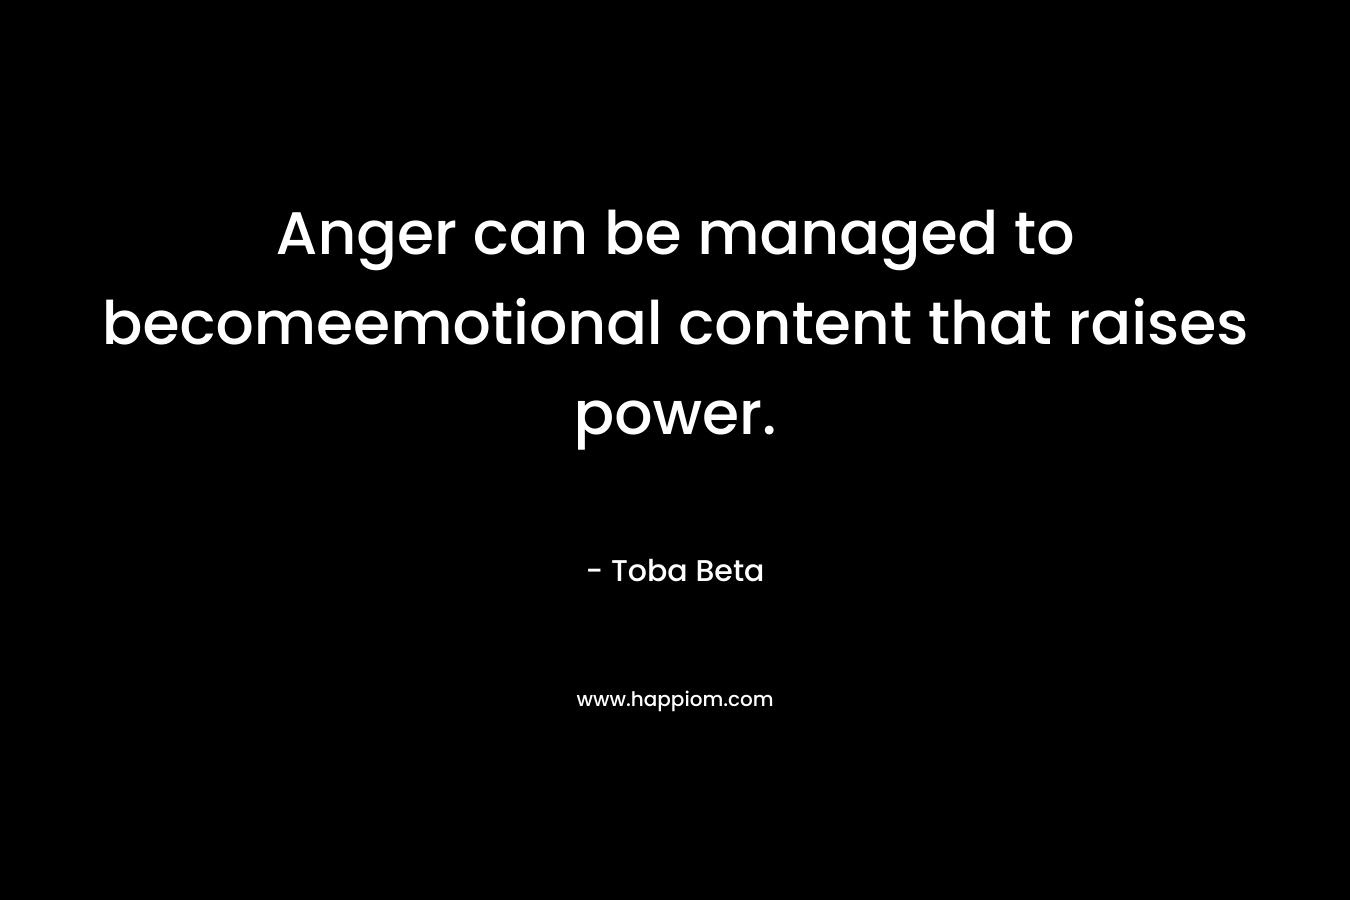 Anger can be managed to becomeemotional content that raises power.